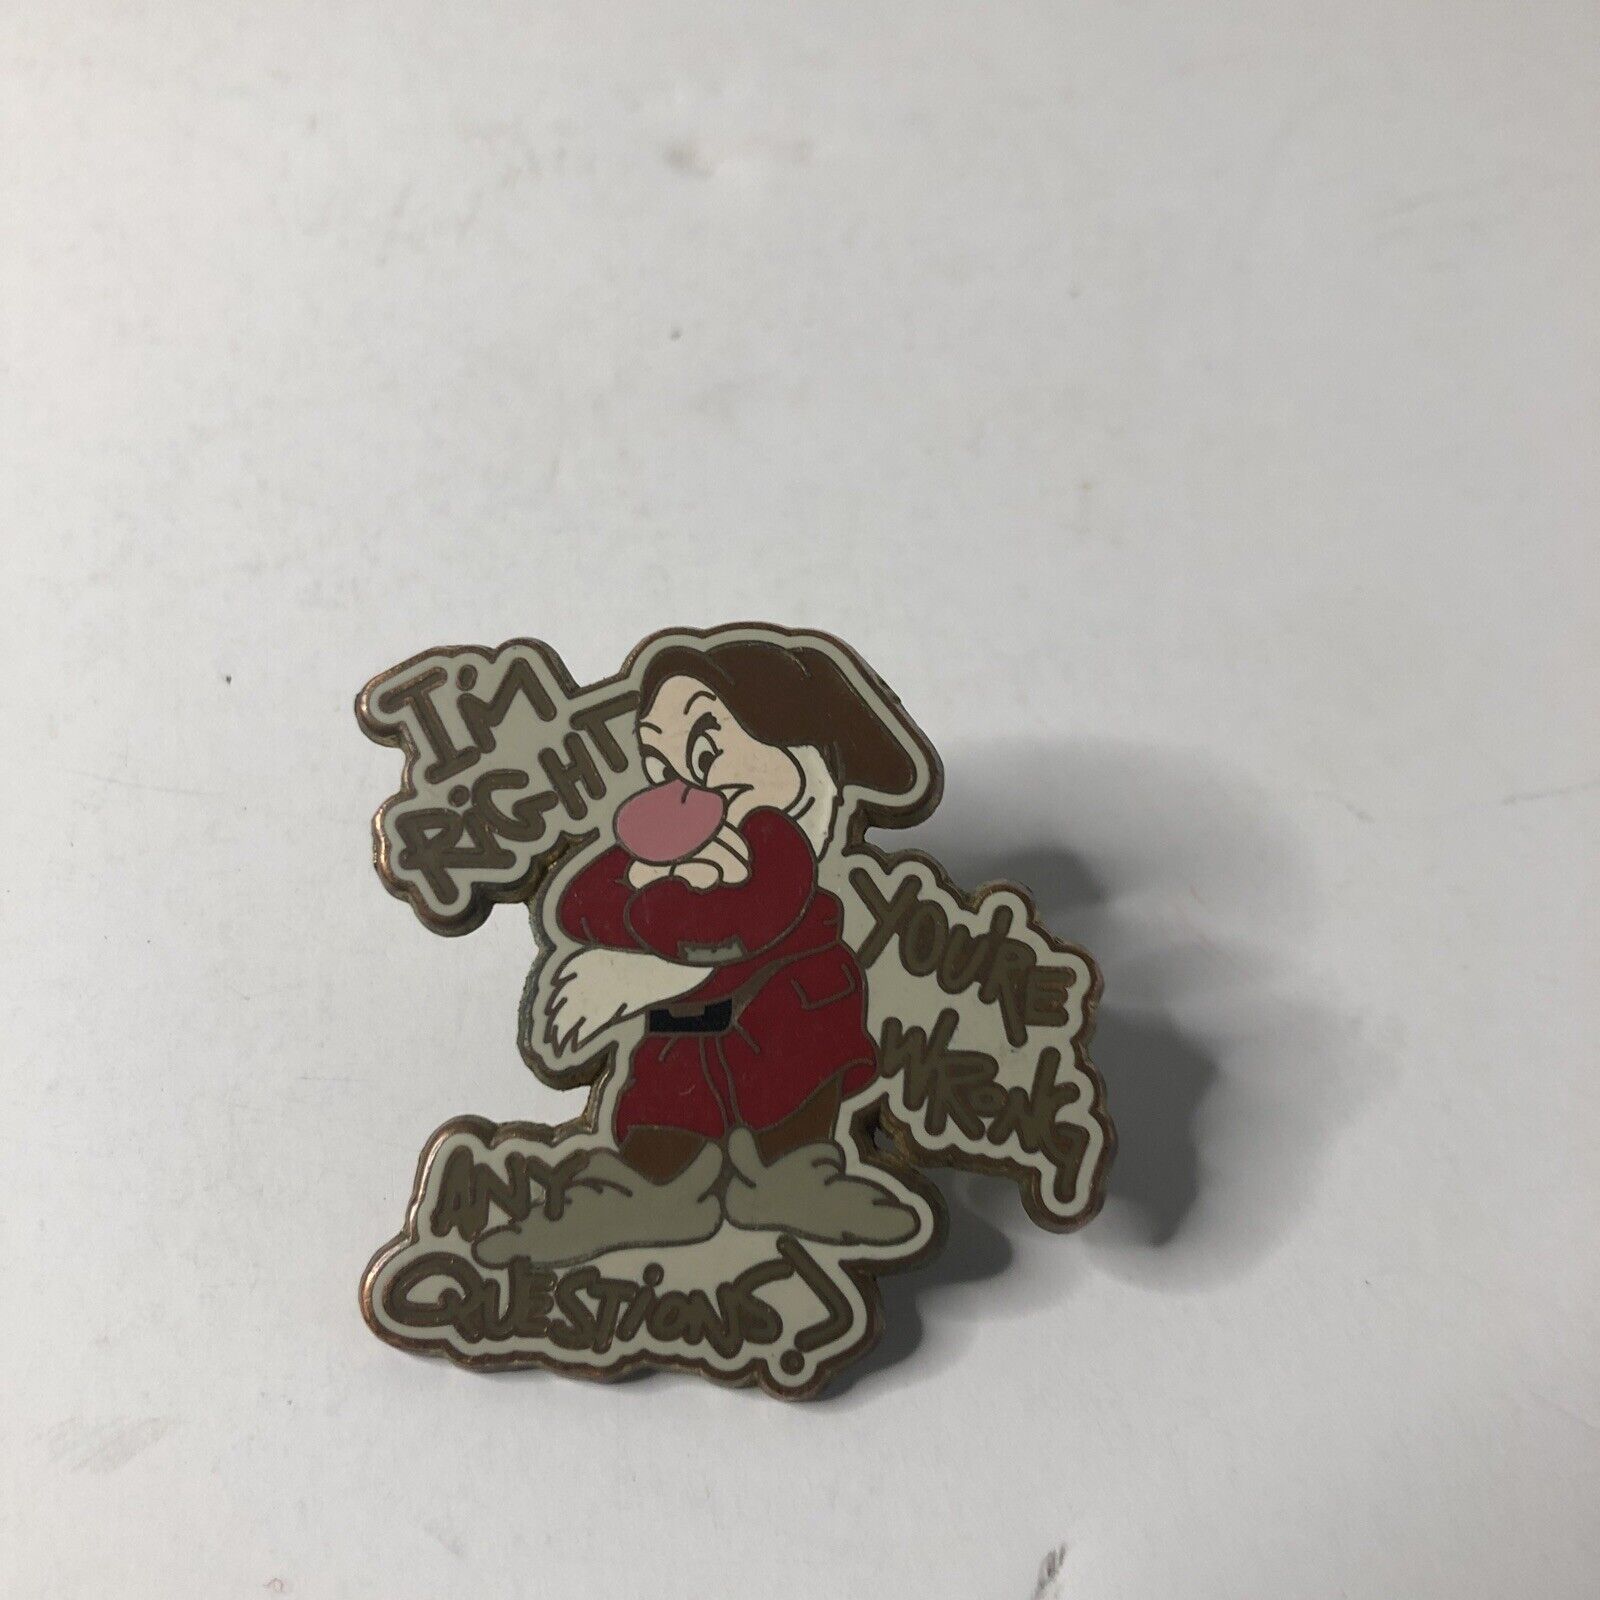 Disney Parks Grumpy Im Right You're Wrong Any Questions? Pin New